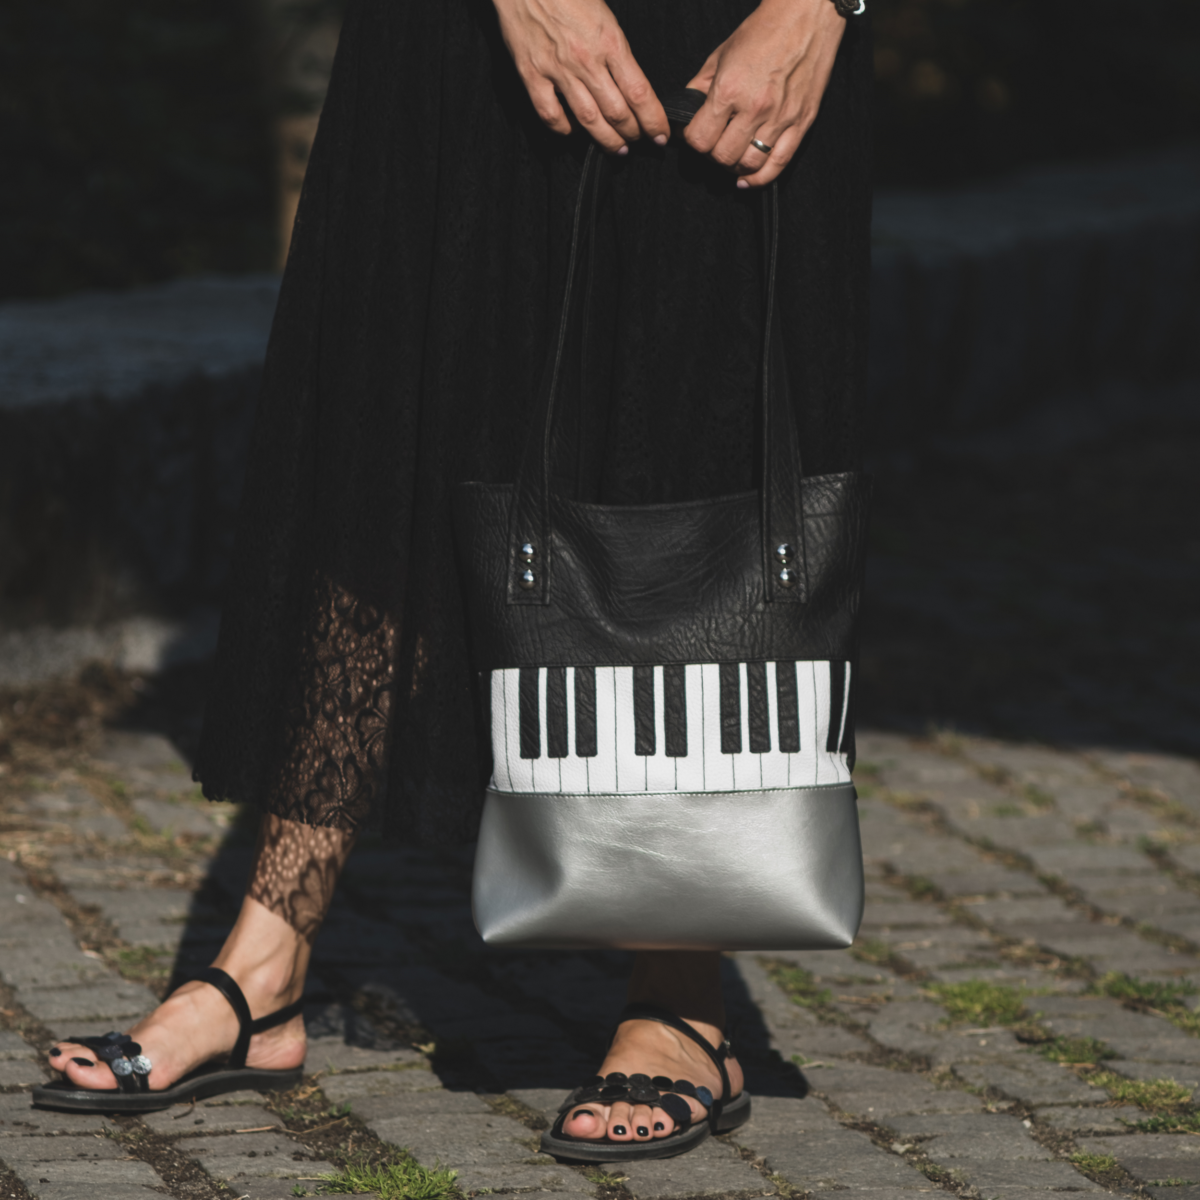 Piano Leather Tote Bag by Bysol Bags - Handcrafted and eco-friendly tote bag with piano elements